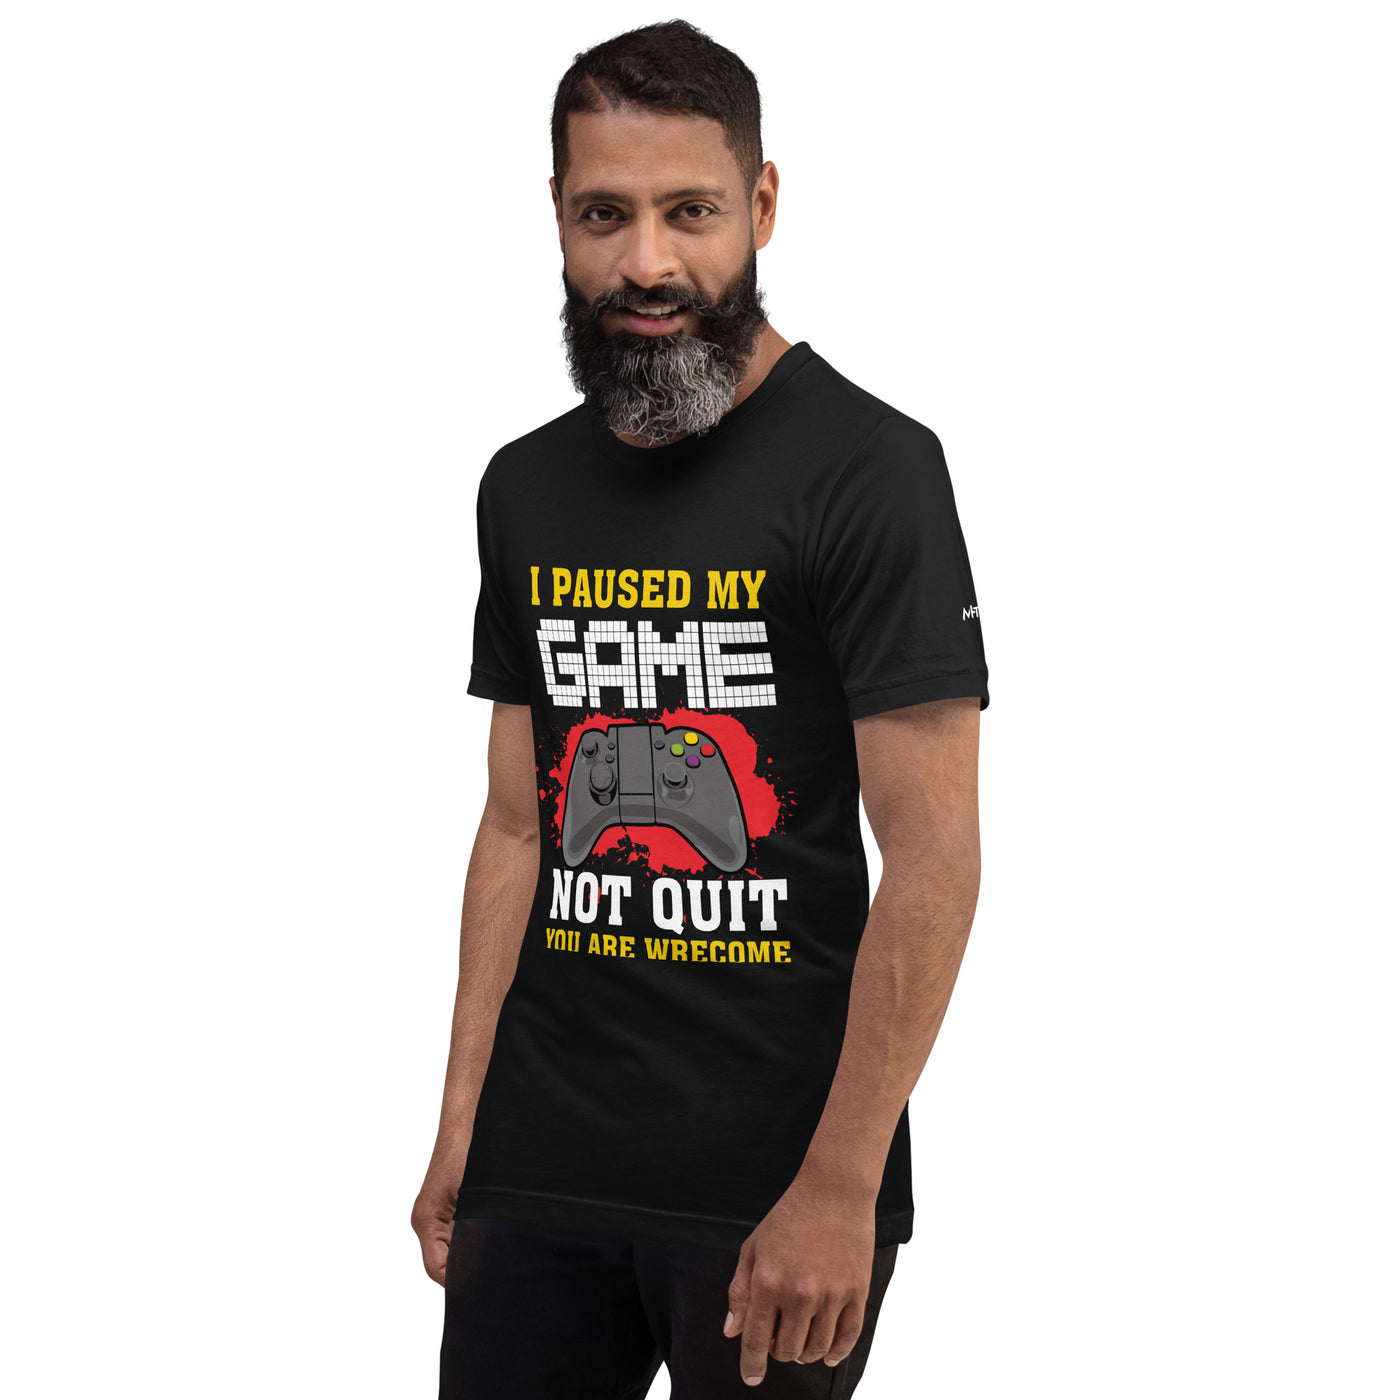 I Paused My Game, Not quit and you are welcome - Unisex t-shirt